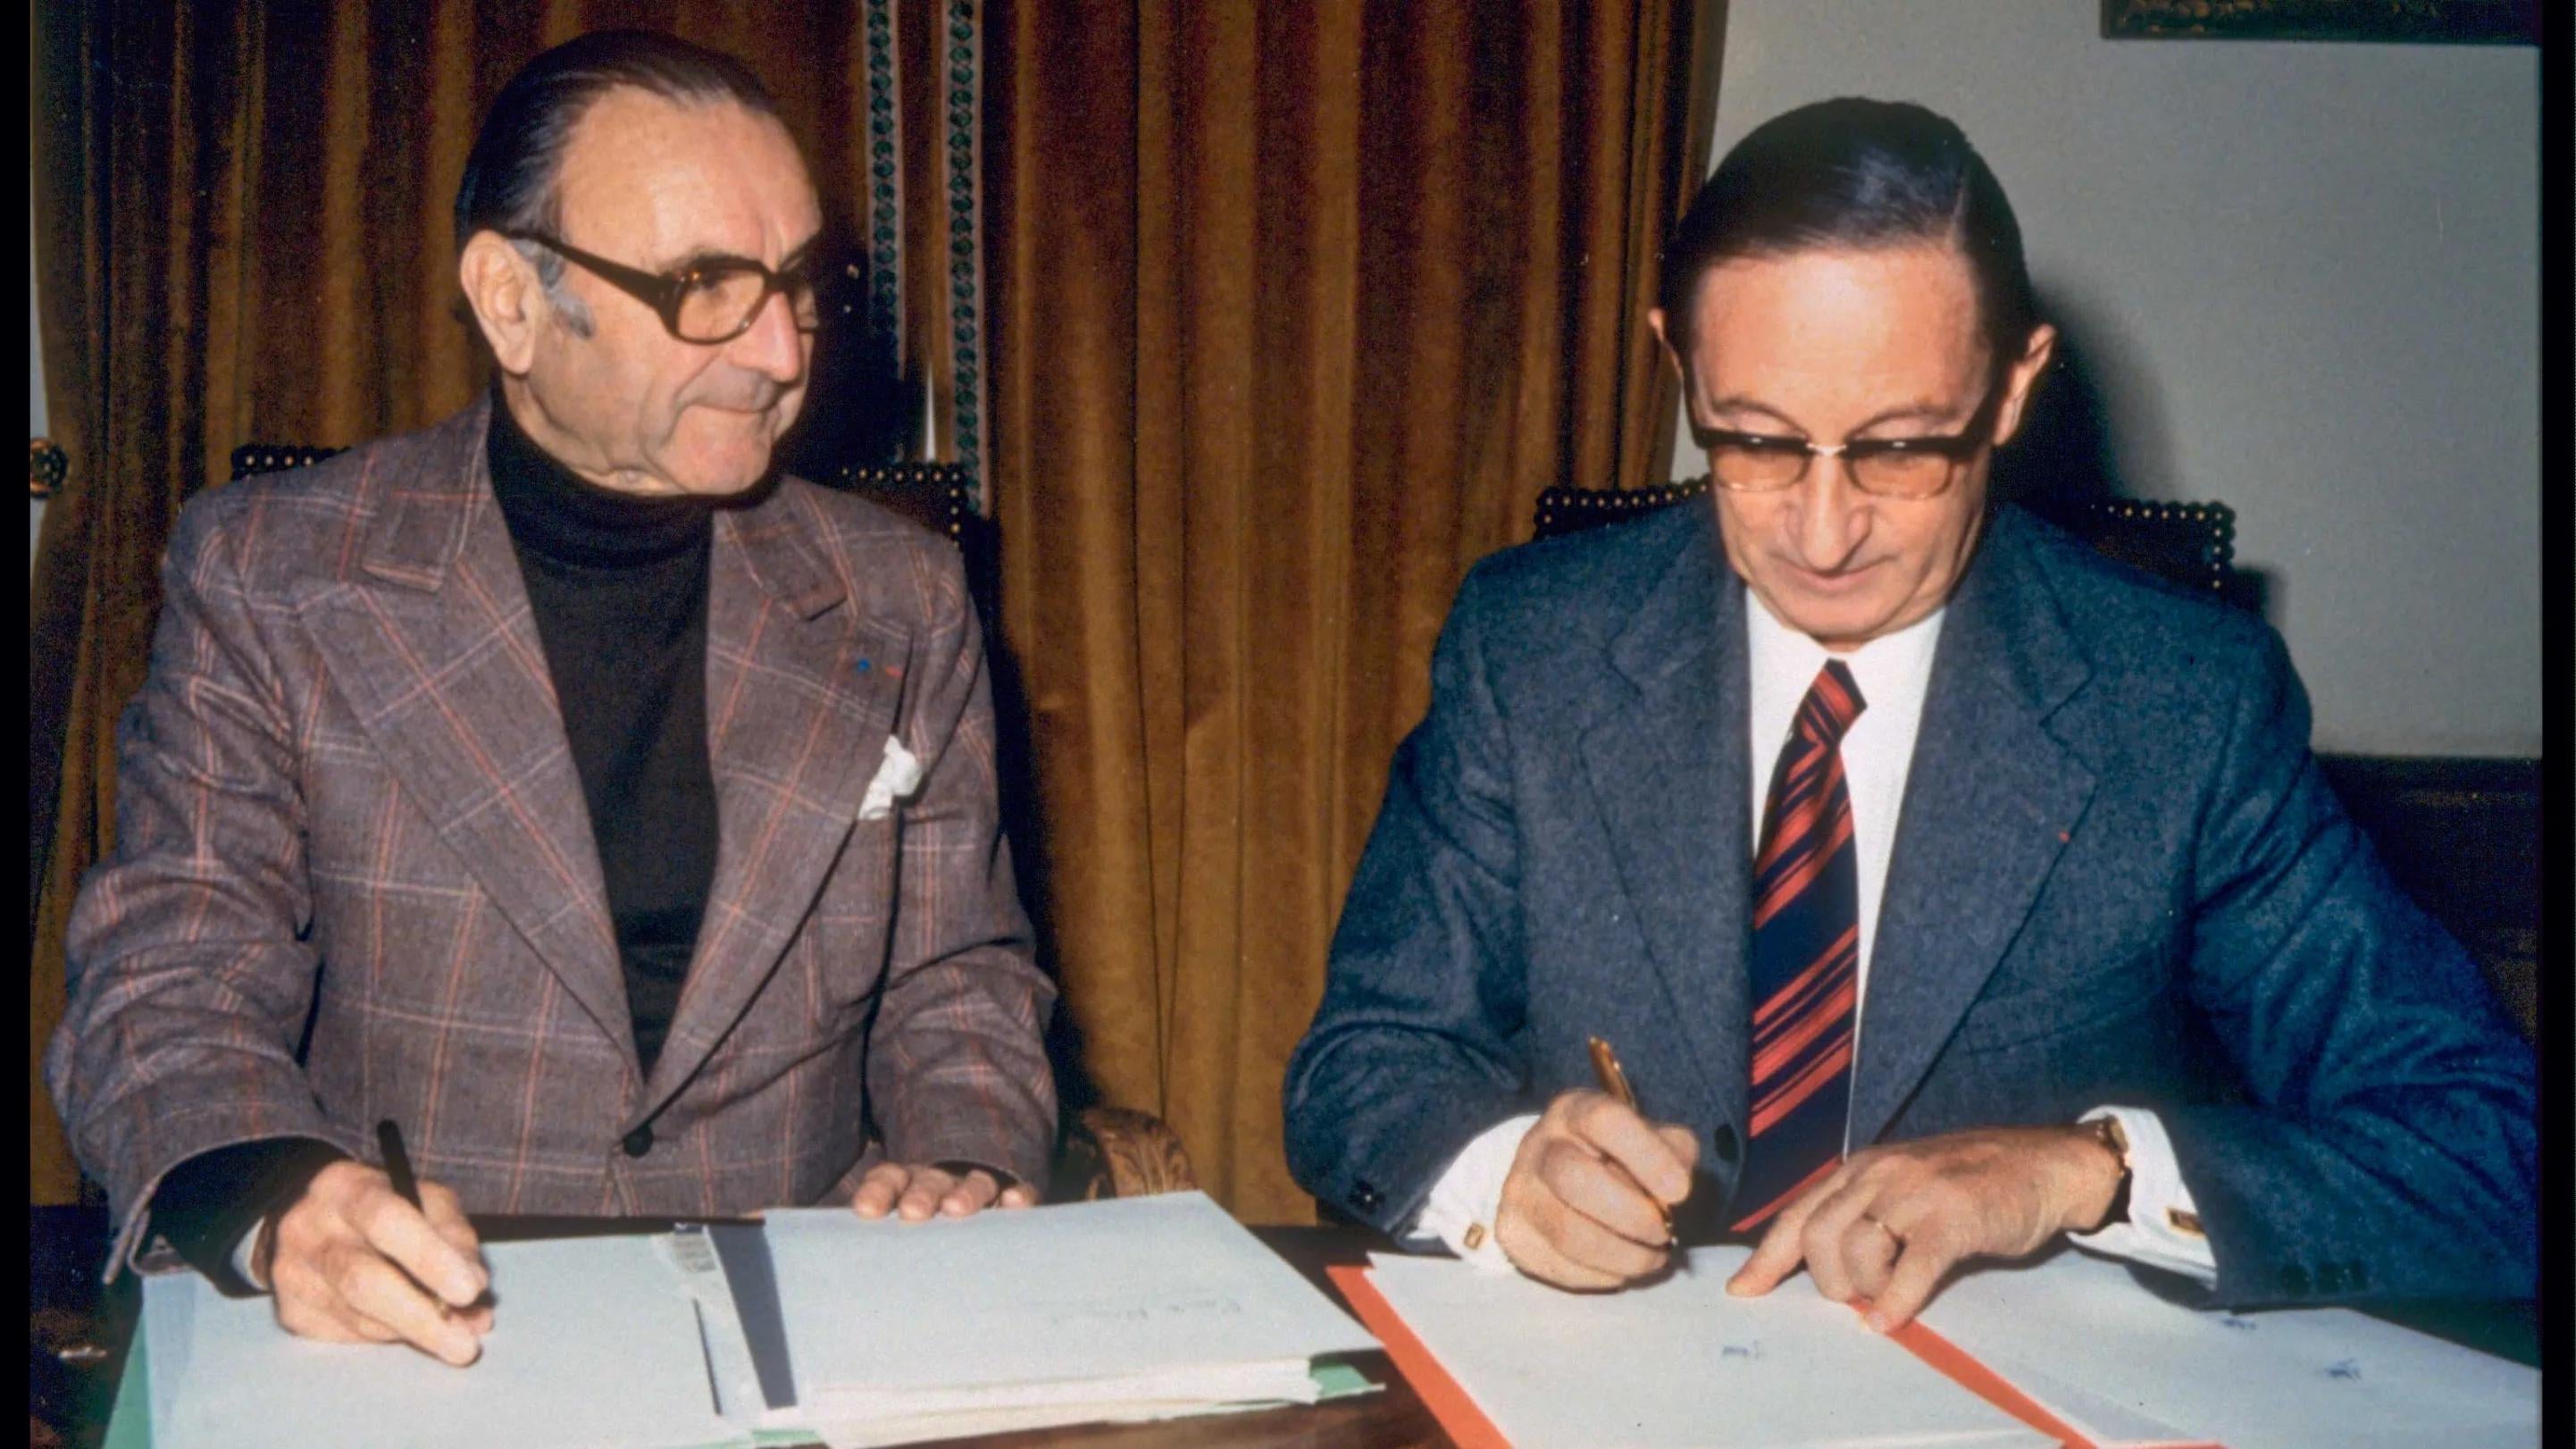 Paul Ricard and Jean Hemard sign a contract at the creation of Pernod Ricard in 1975.